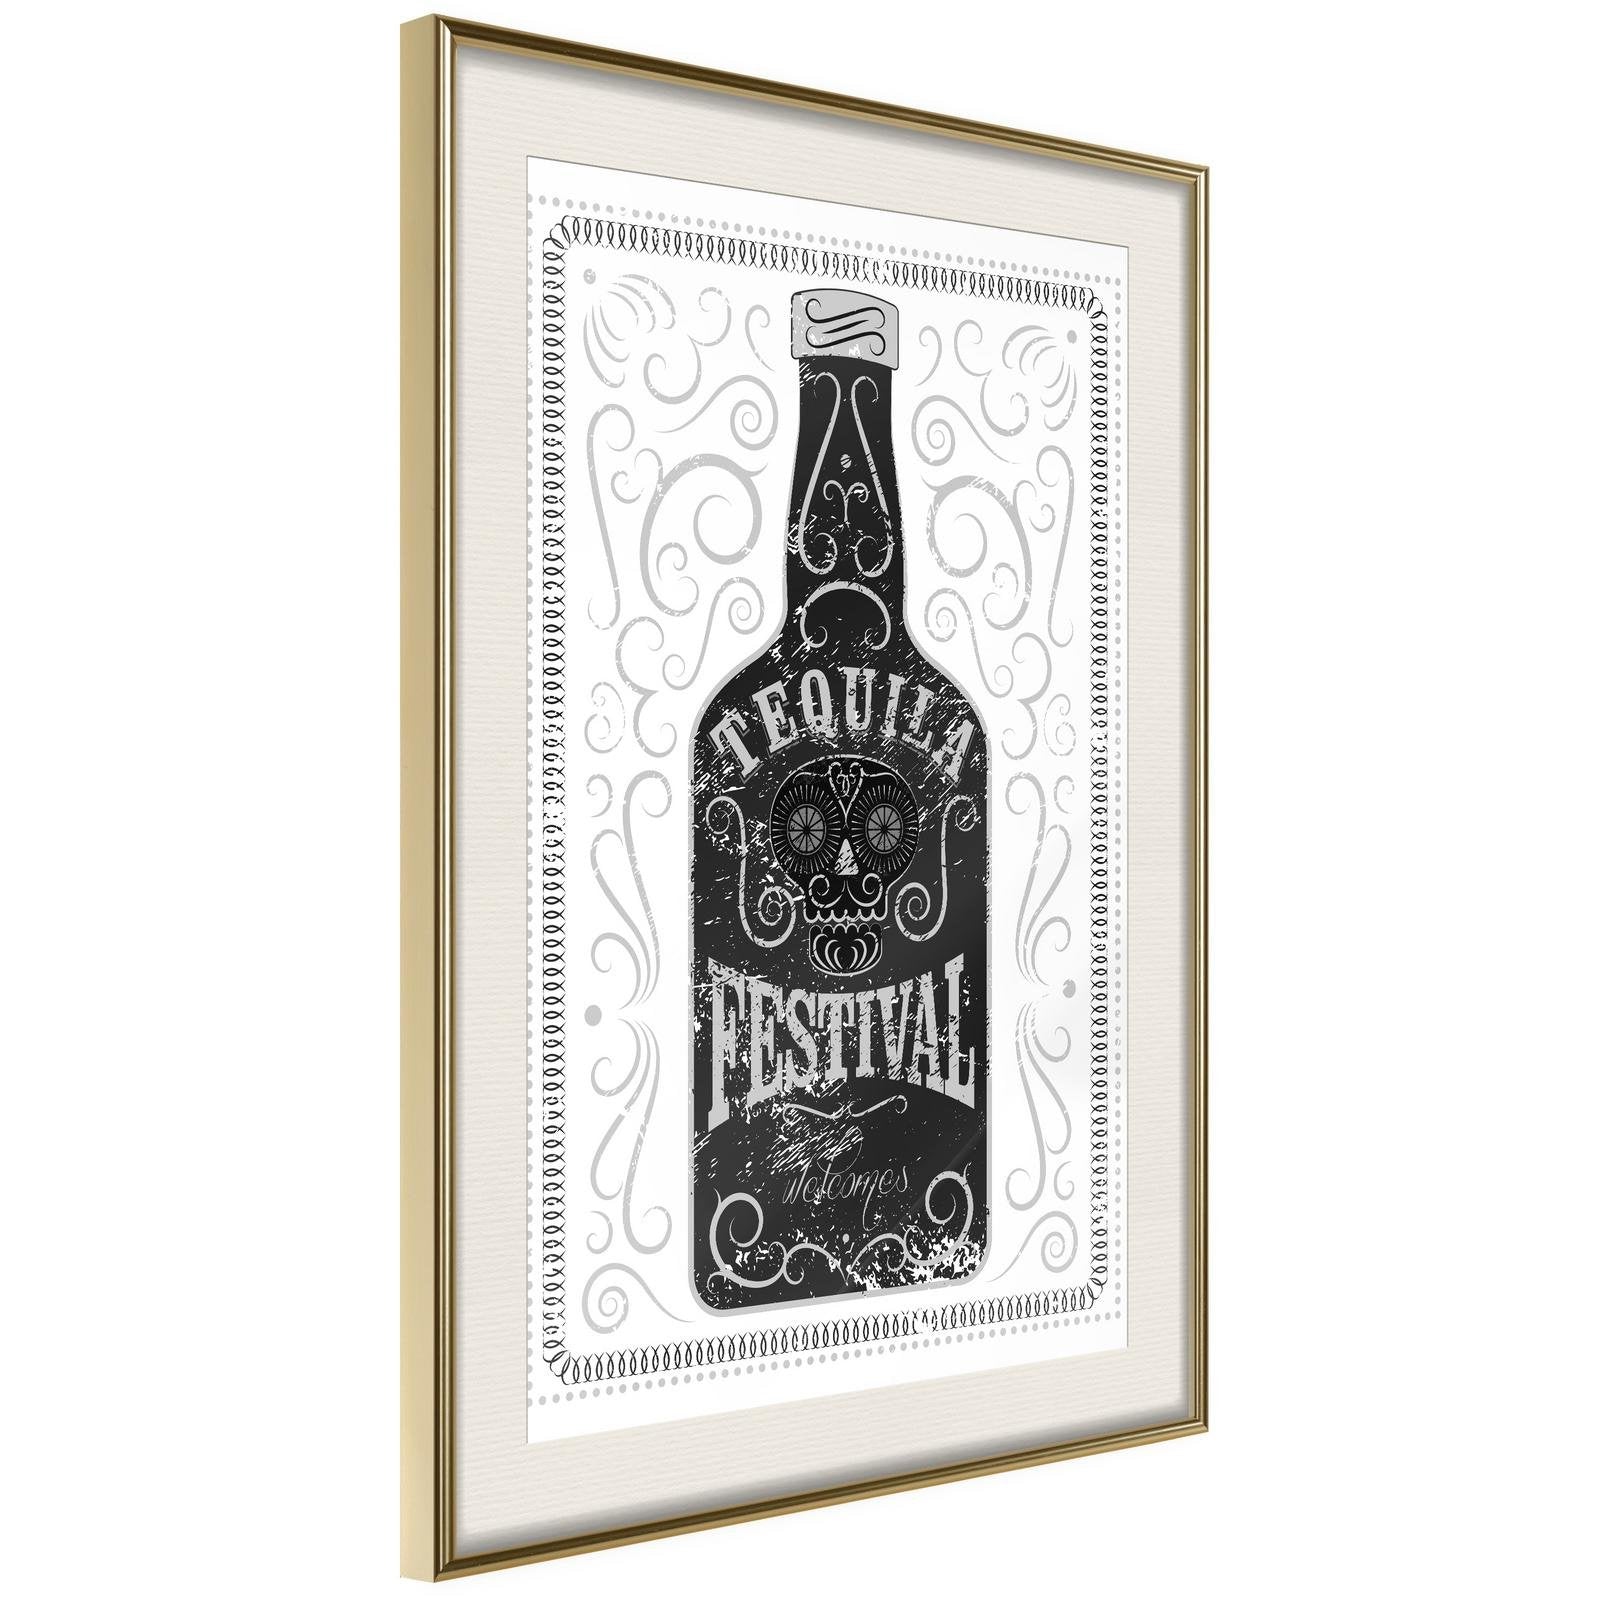 Inramad Poster / Tavla - Bottle of Tequila-Poster Inramad-Artgeist-20x30-Guldram med passepartout-peaceofhome.se